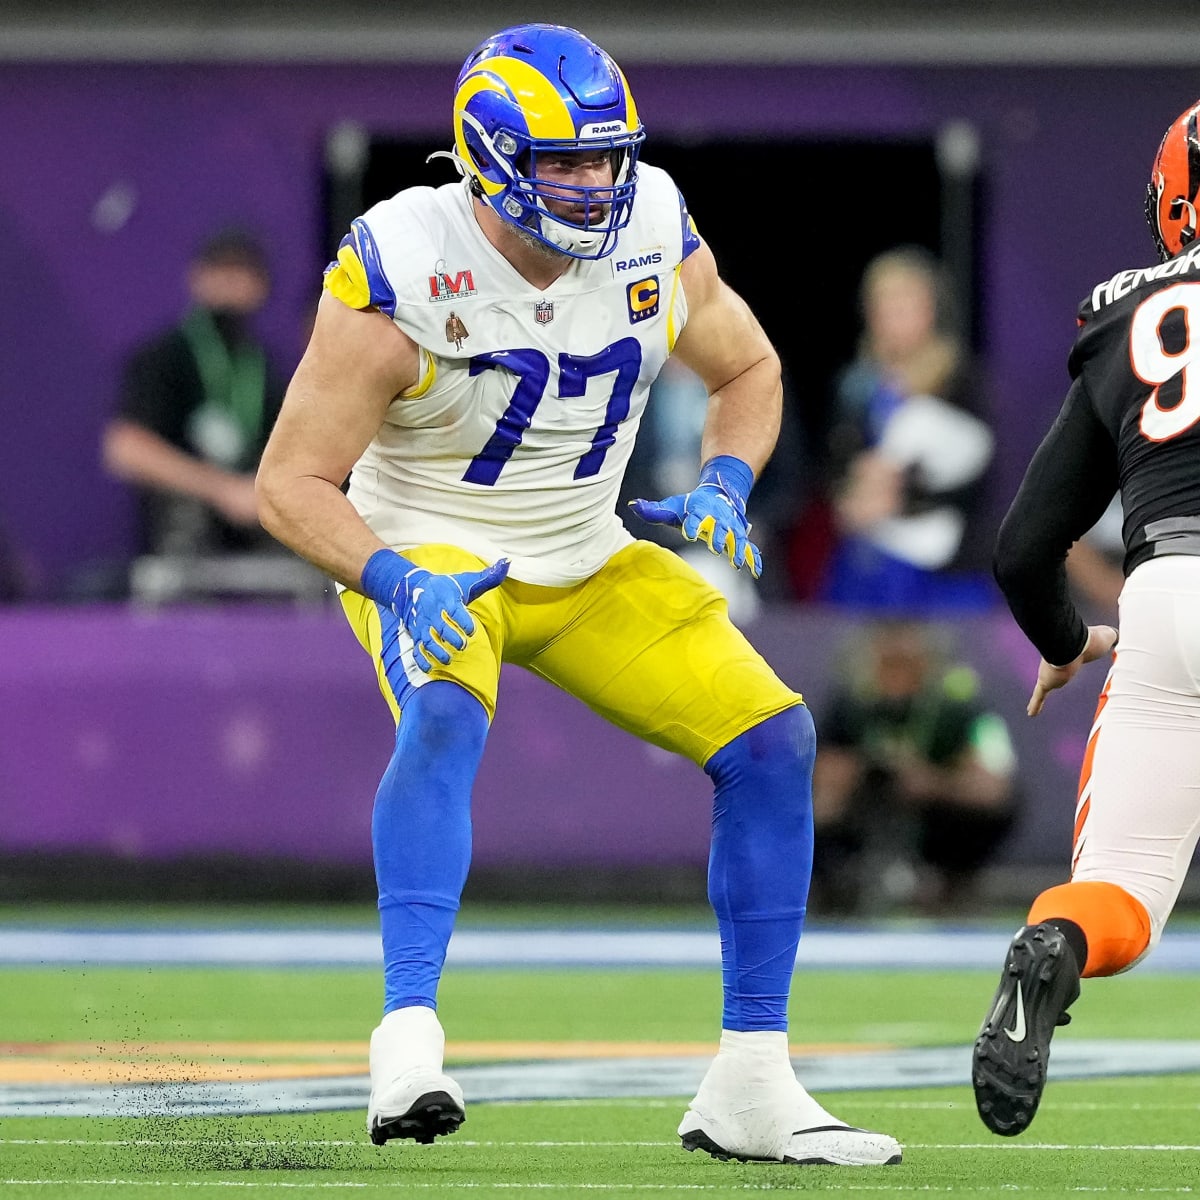 Super Bowl 2022: Rams' Andrew Whitworth finally gets elusive ring